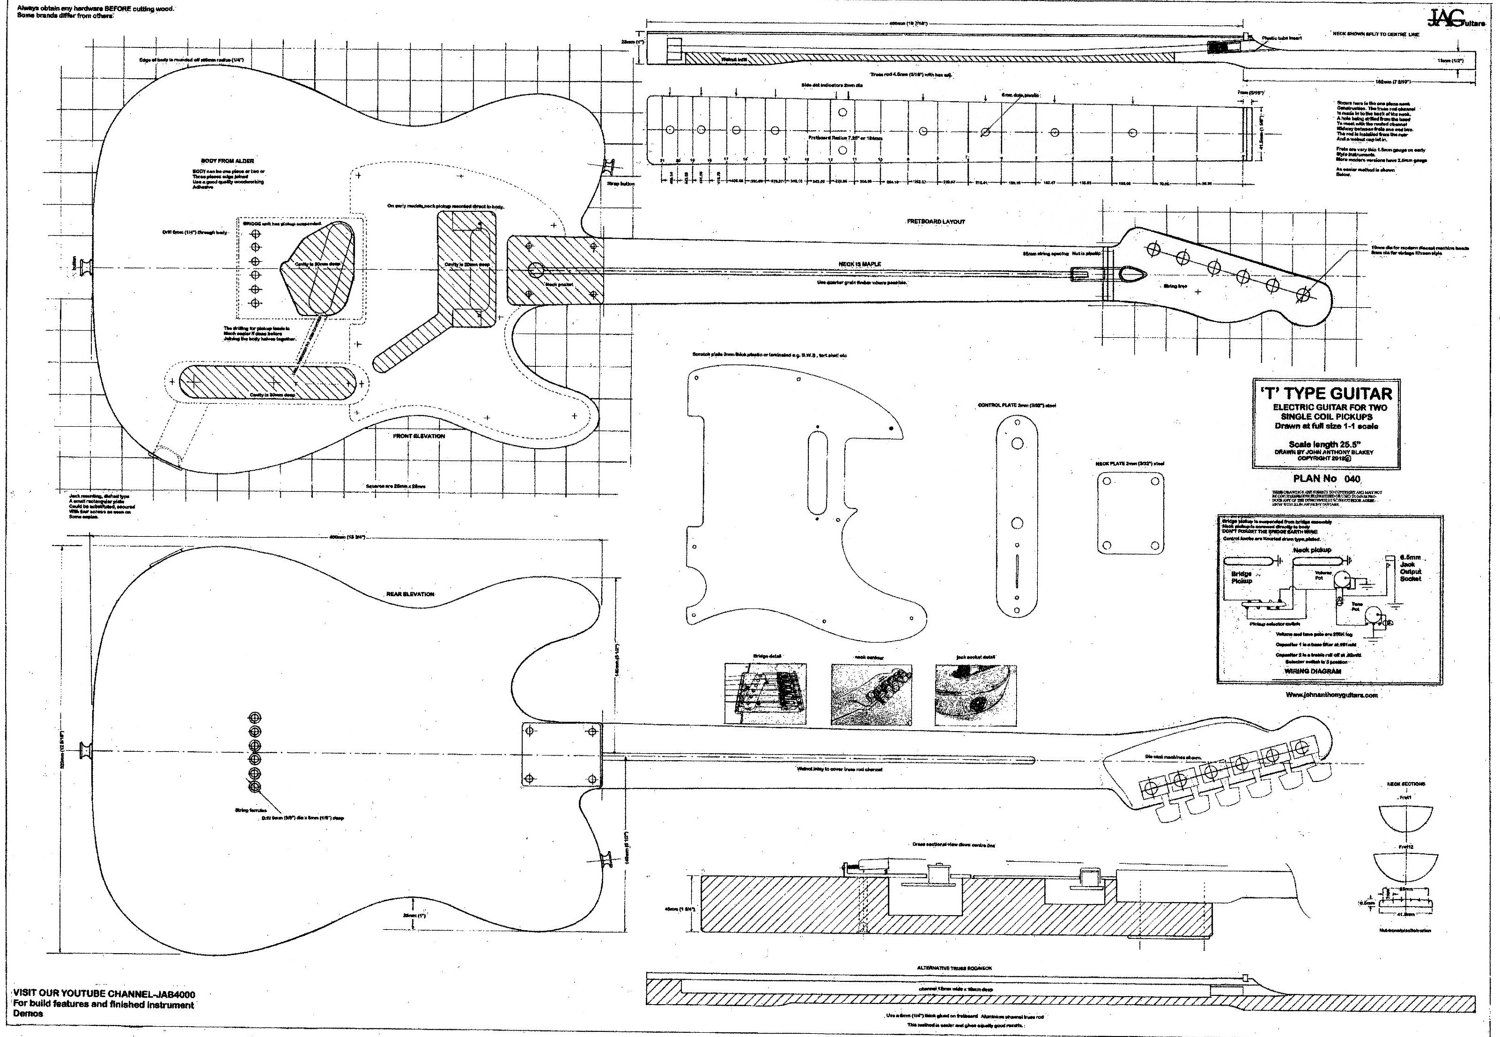 Telecaster Routing Template